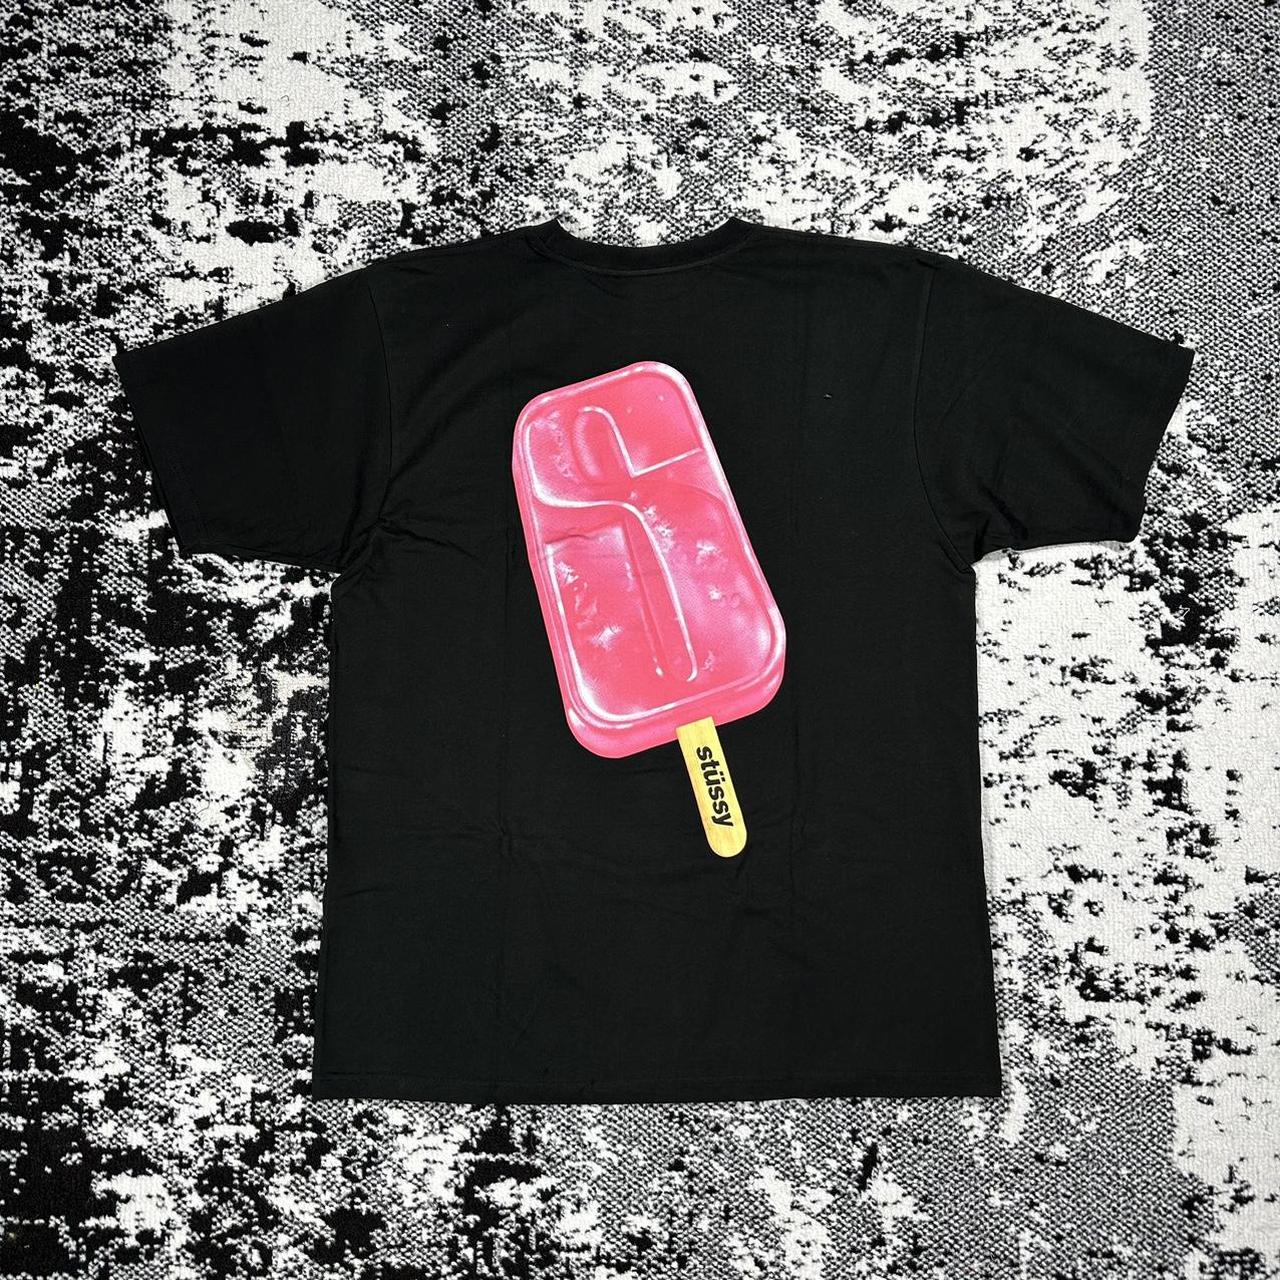 STUSSY POPSICLE TEE -BLACK- In stock for size M, L... - Depop